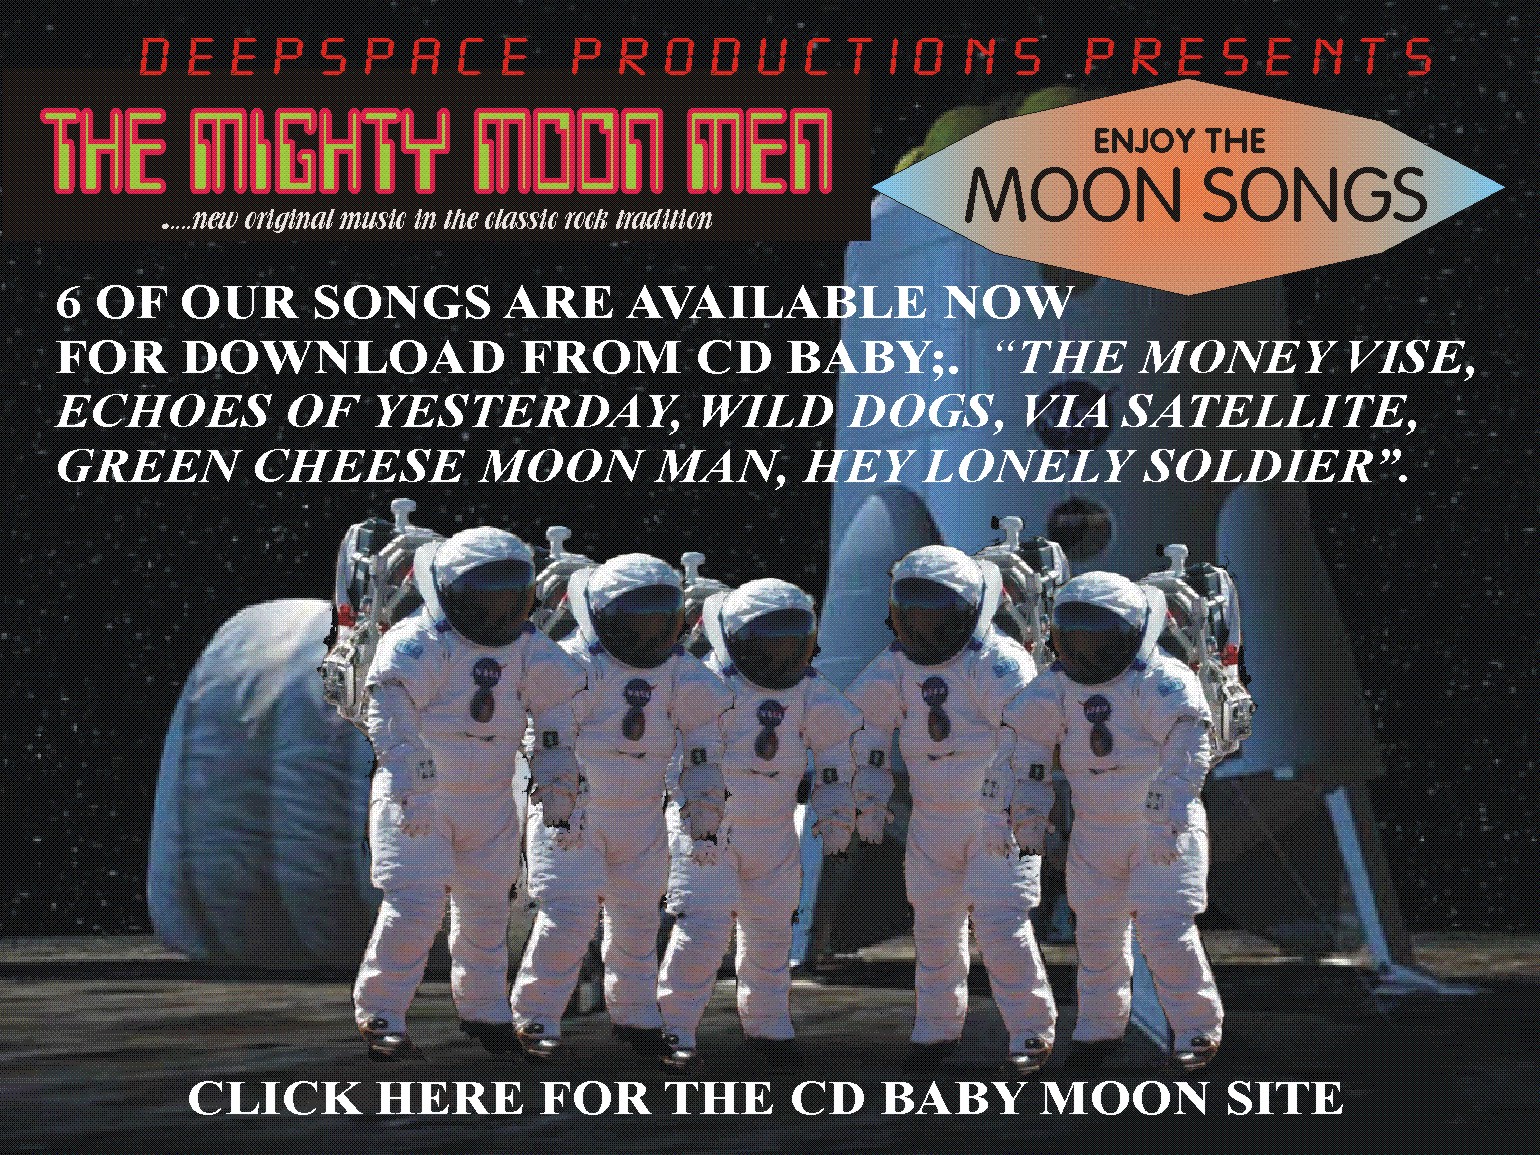 CLICK HERE FOR THE CD BABY MOON SITE